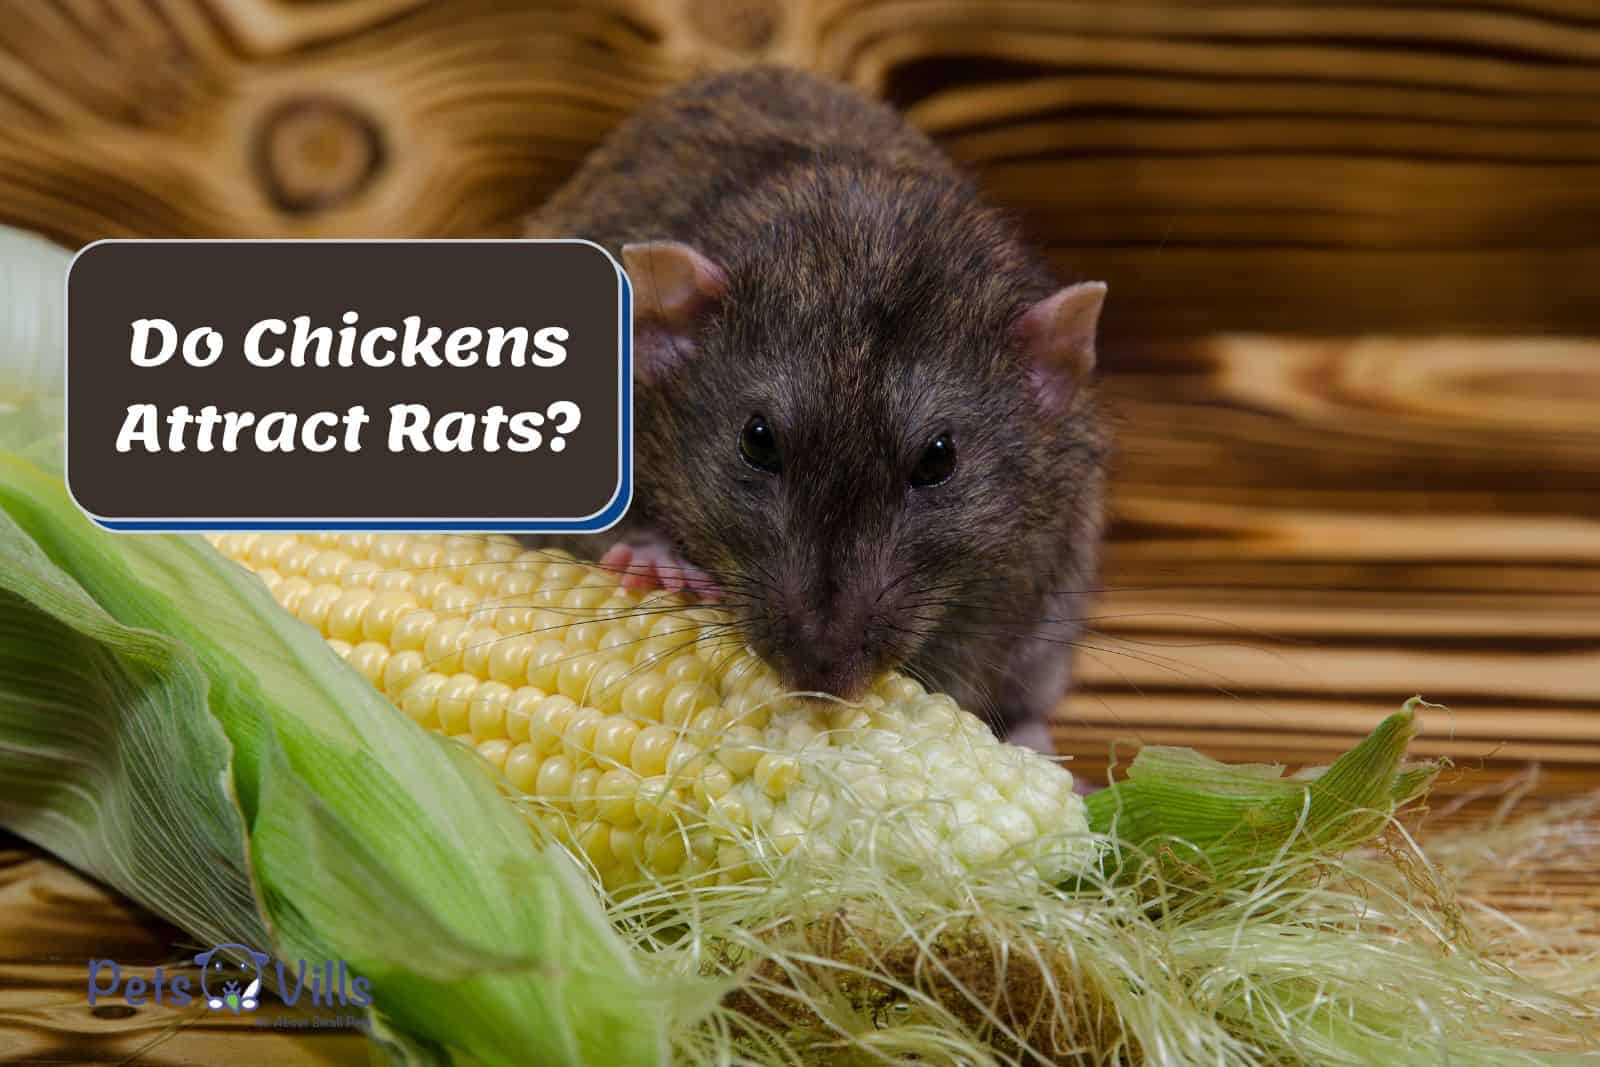 rat eating ripe corn but Do Chickens Attract Rats?